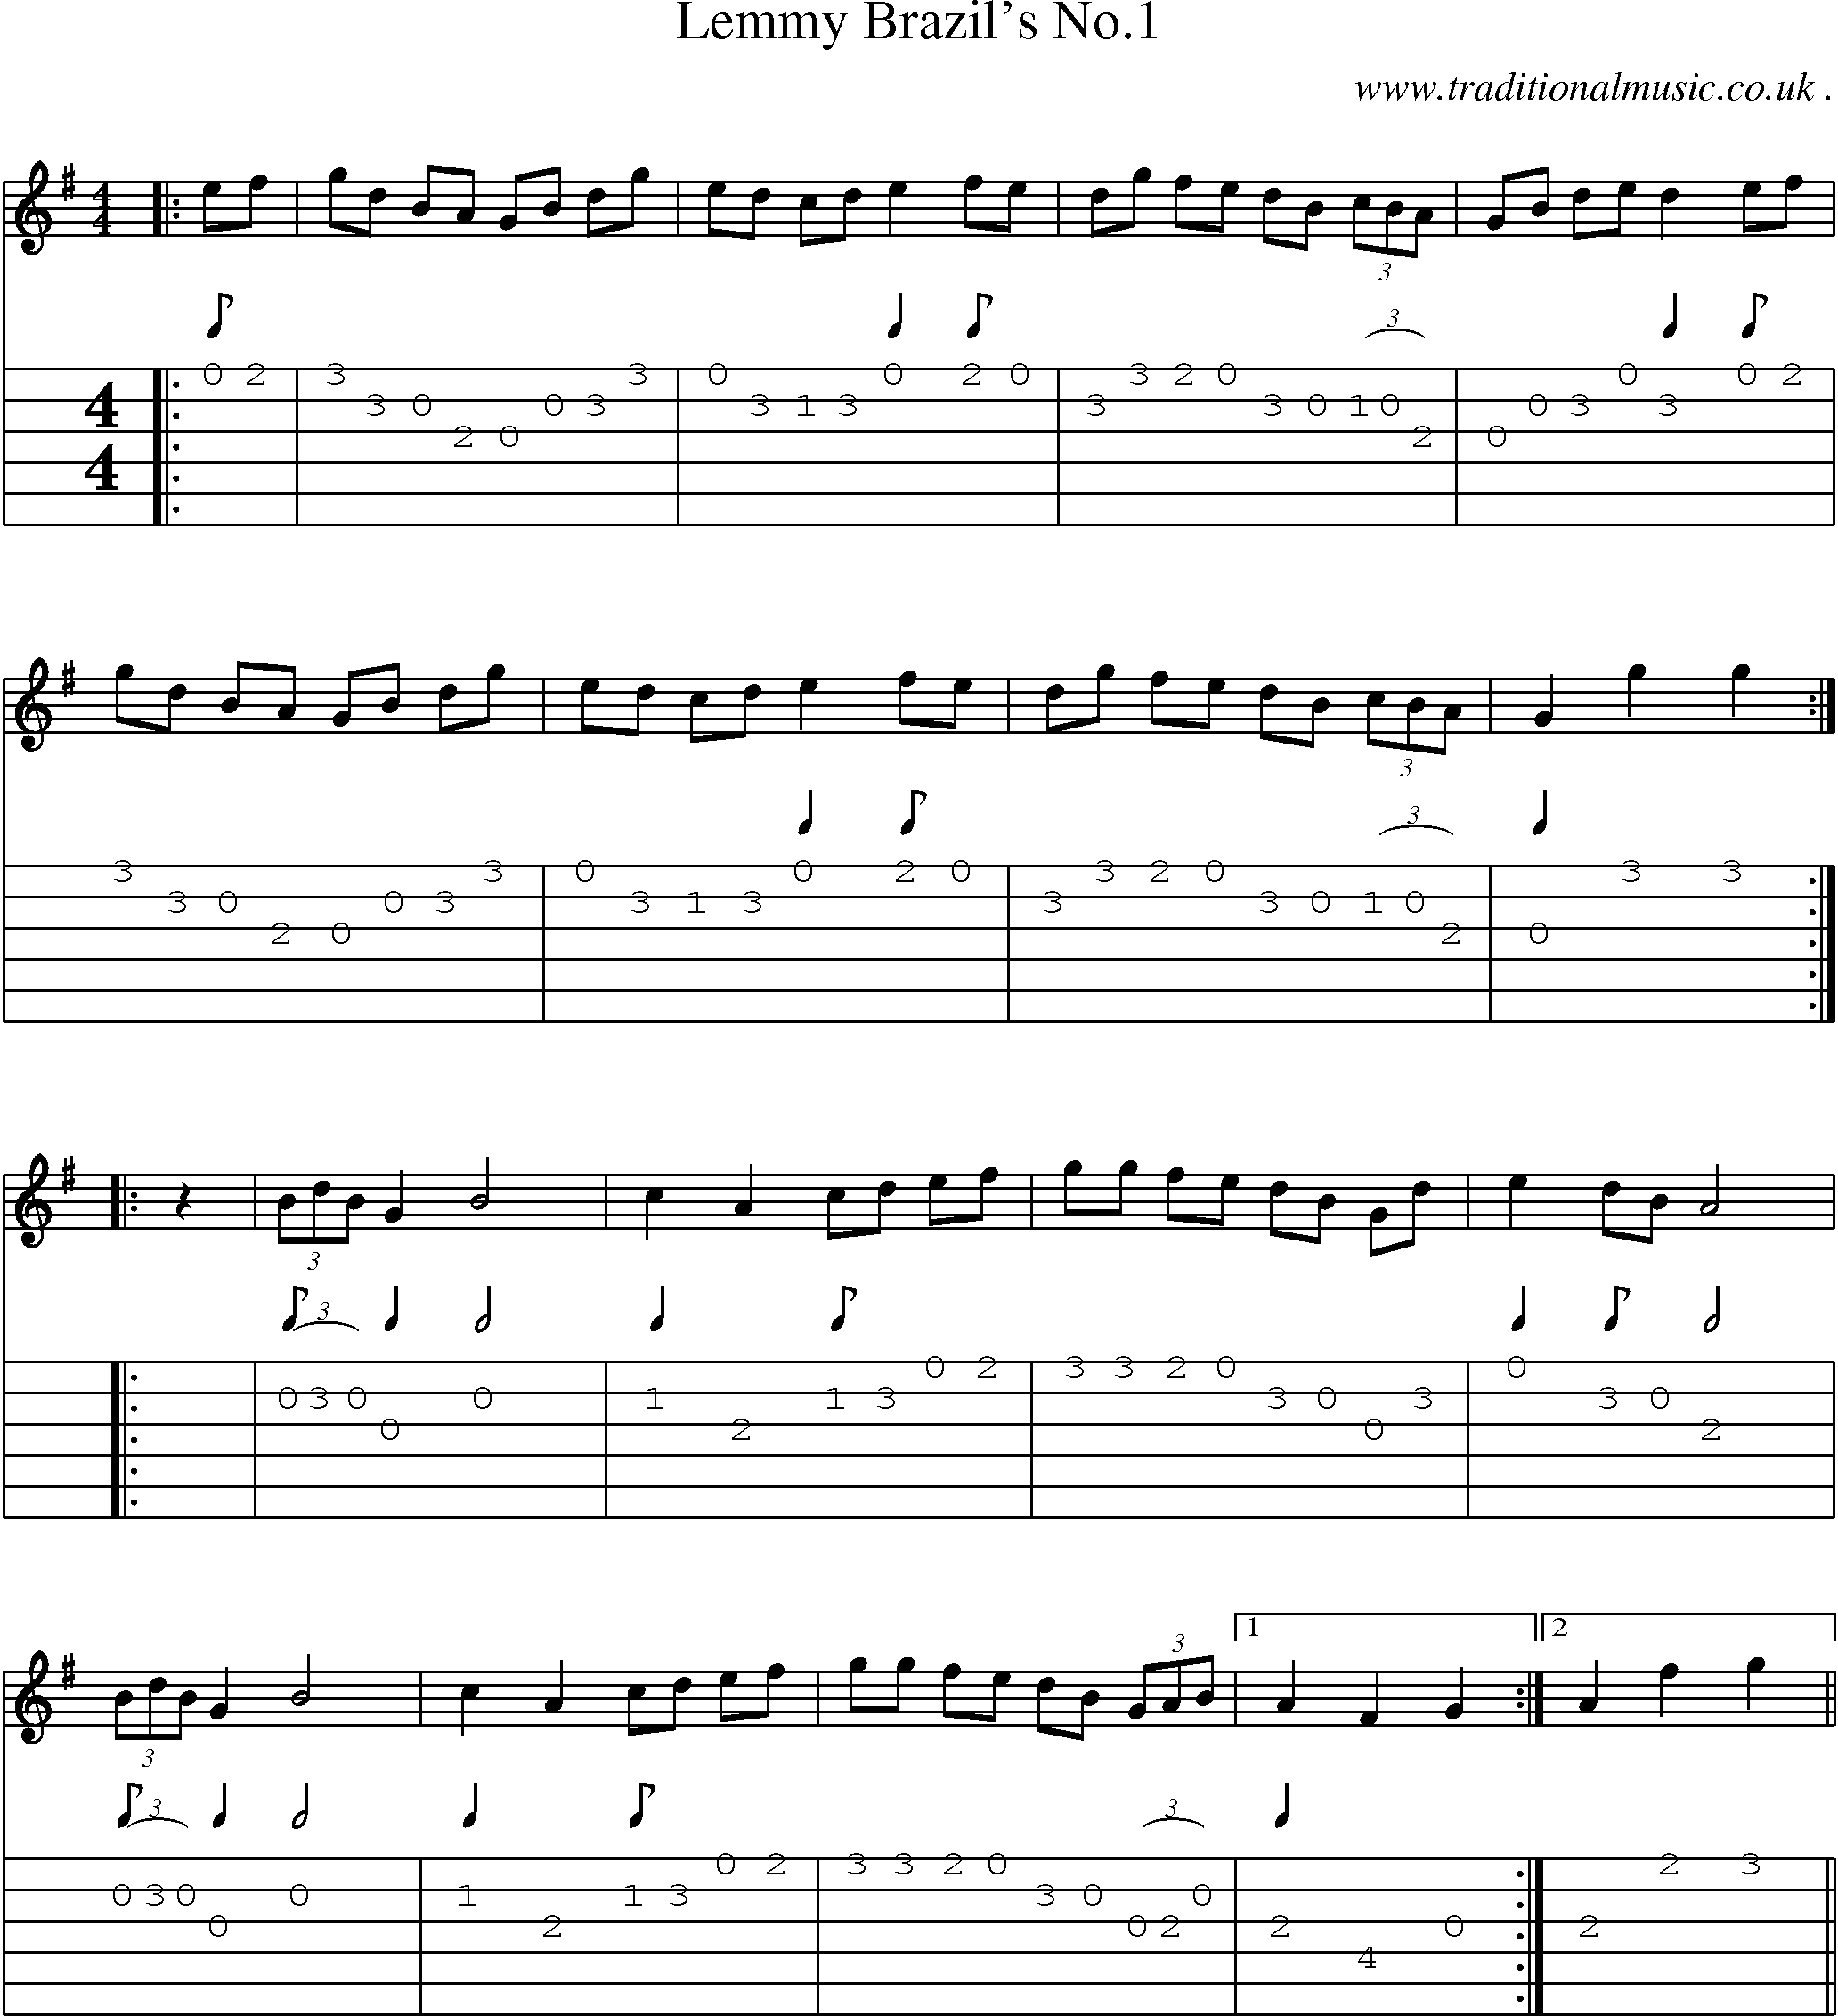 Sheet-Music and Guitar Tabs for Lemmy Brazils No1